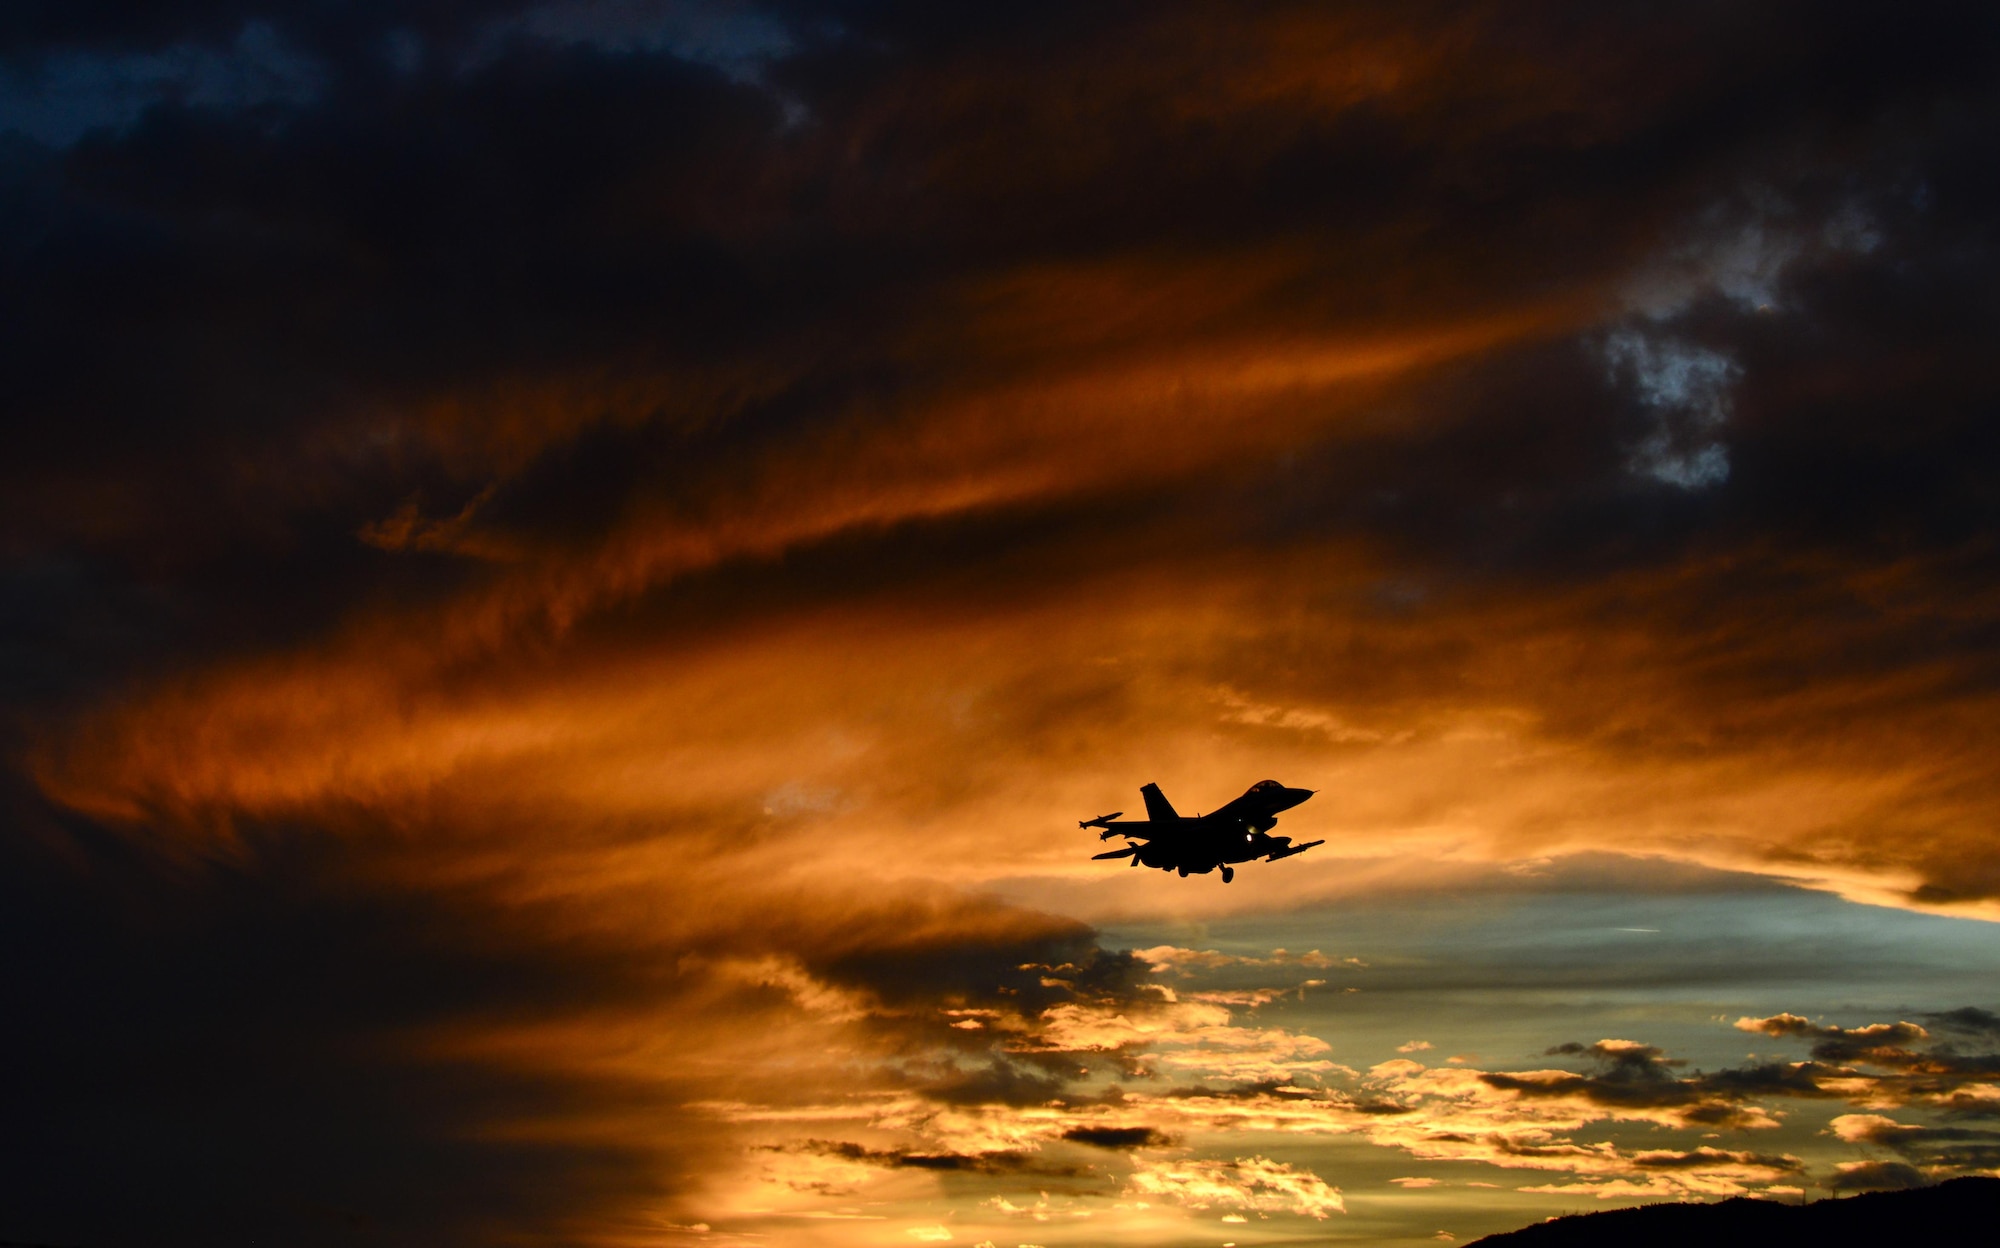 An F-16 Fighting Falcon flies over Aviano Air Base, Italy on Oct. 20, 2016. The 555th and 510th Fighter Squadrons deter aggression, defend U.S. and NATO interests, and develop Aviano through superior combat air power, support and training. (U.S. Air Force photo by Staff Sgt. Krystal Ardrey/Released)